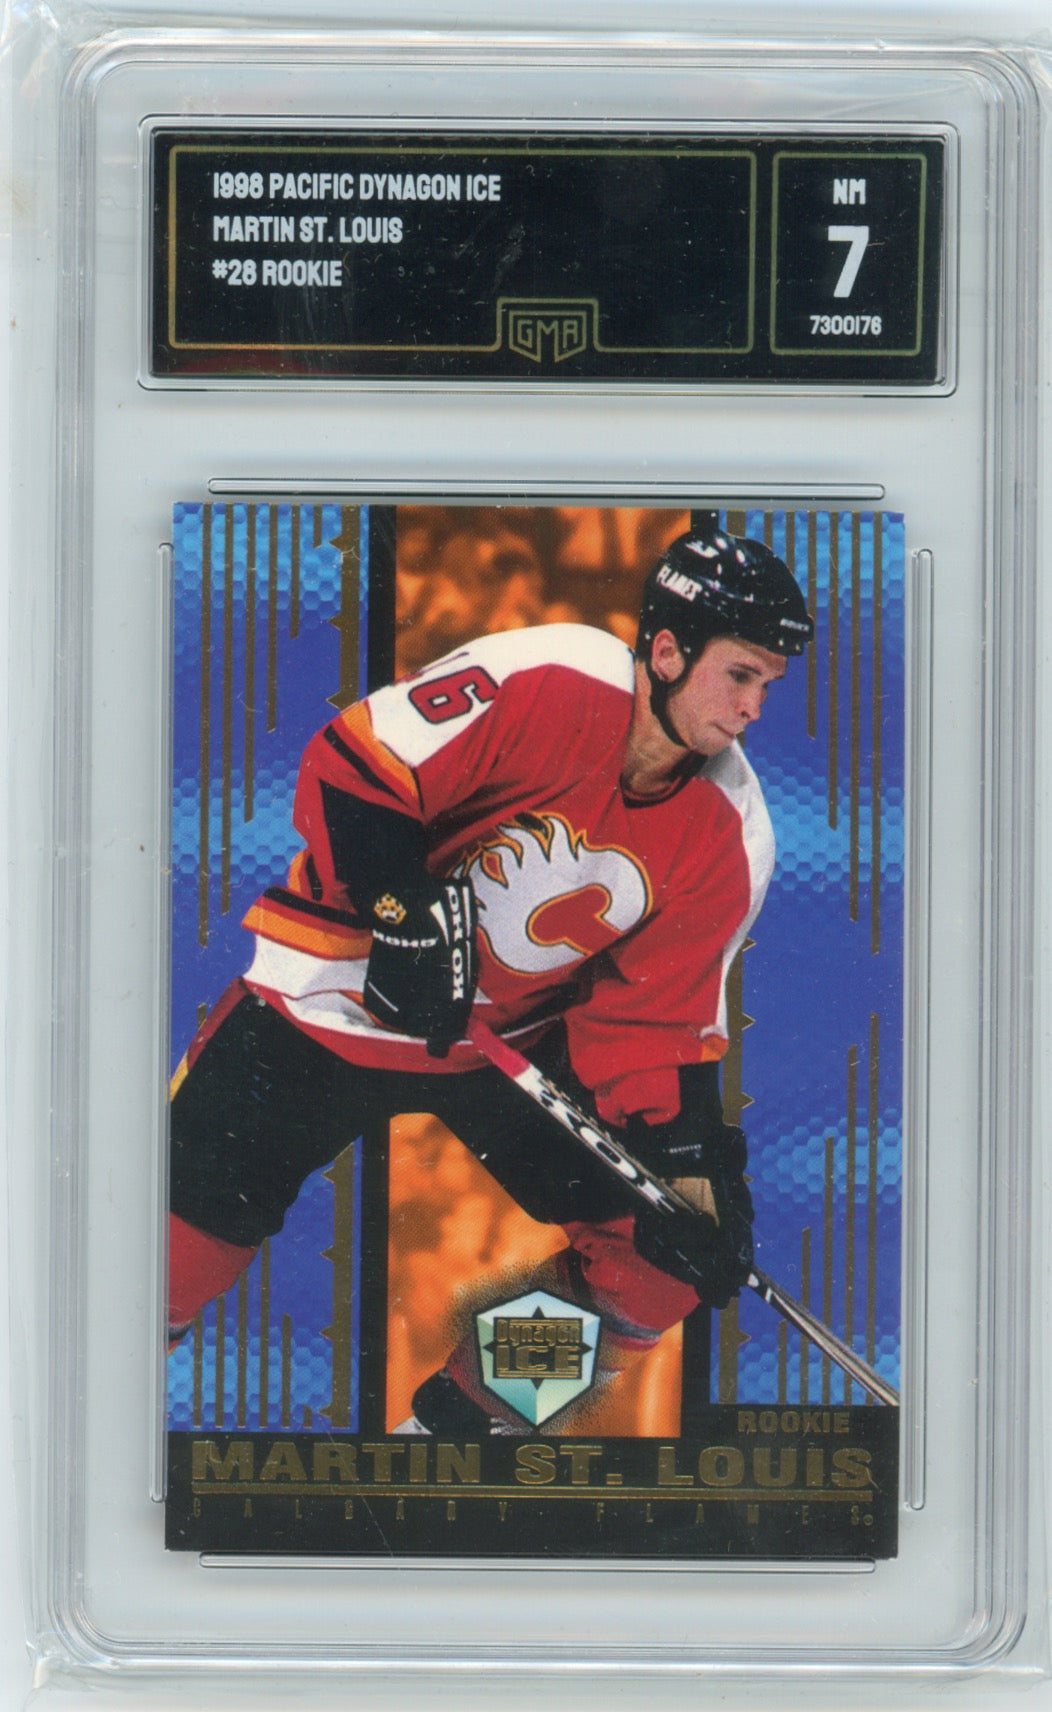 1998 Pacific Dynagon Ice Martin St. Louis #28 Rookie GMA 7